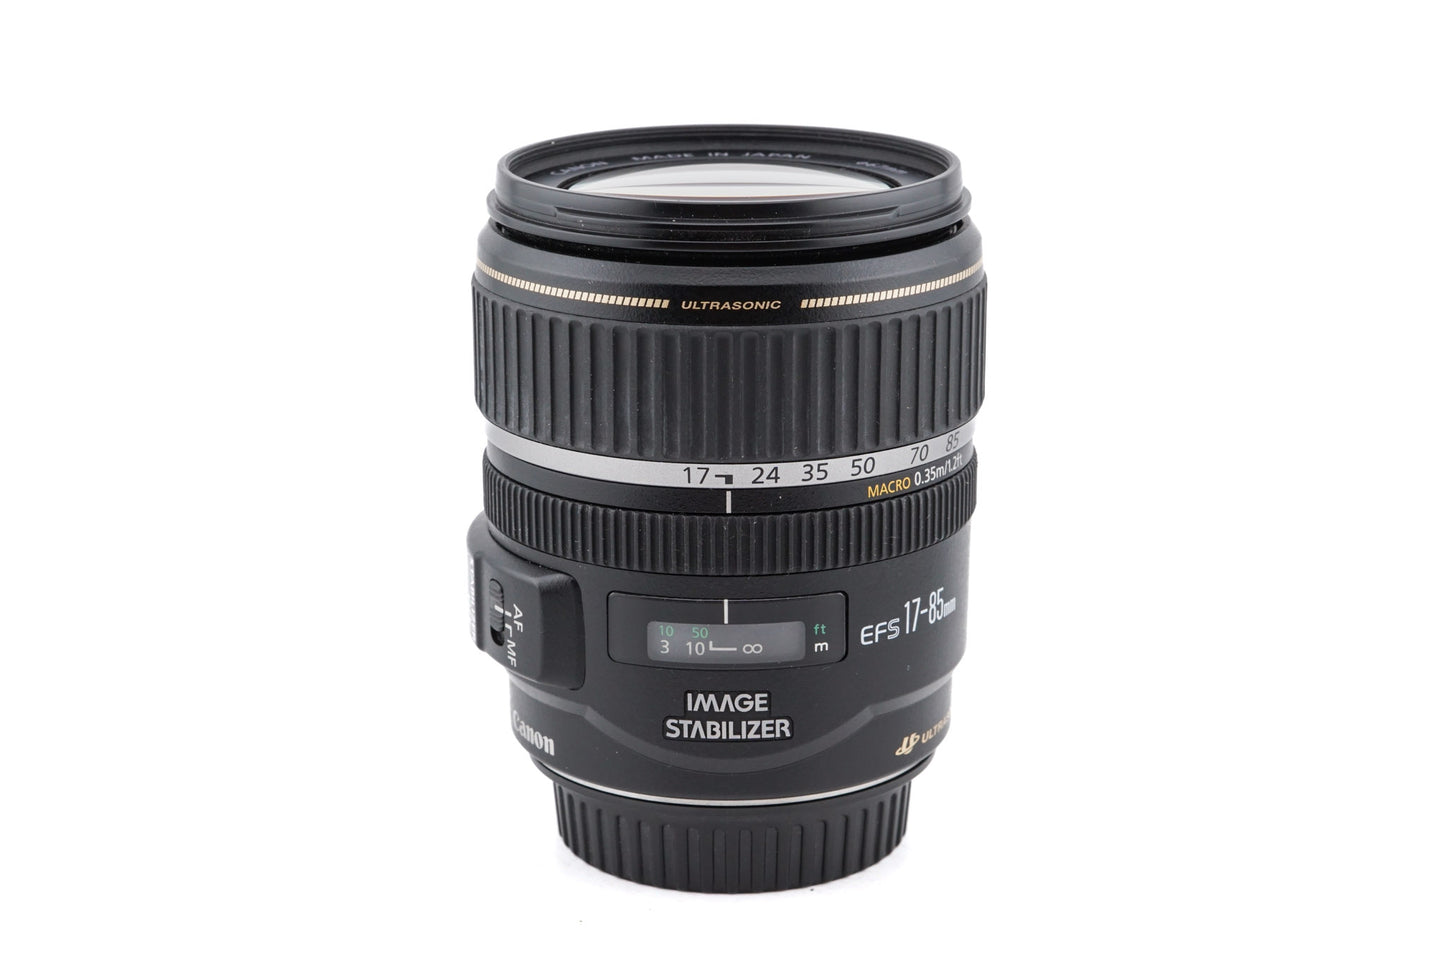 Canon 17-85mm f4-5.6 IS USM